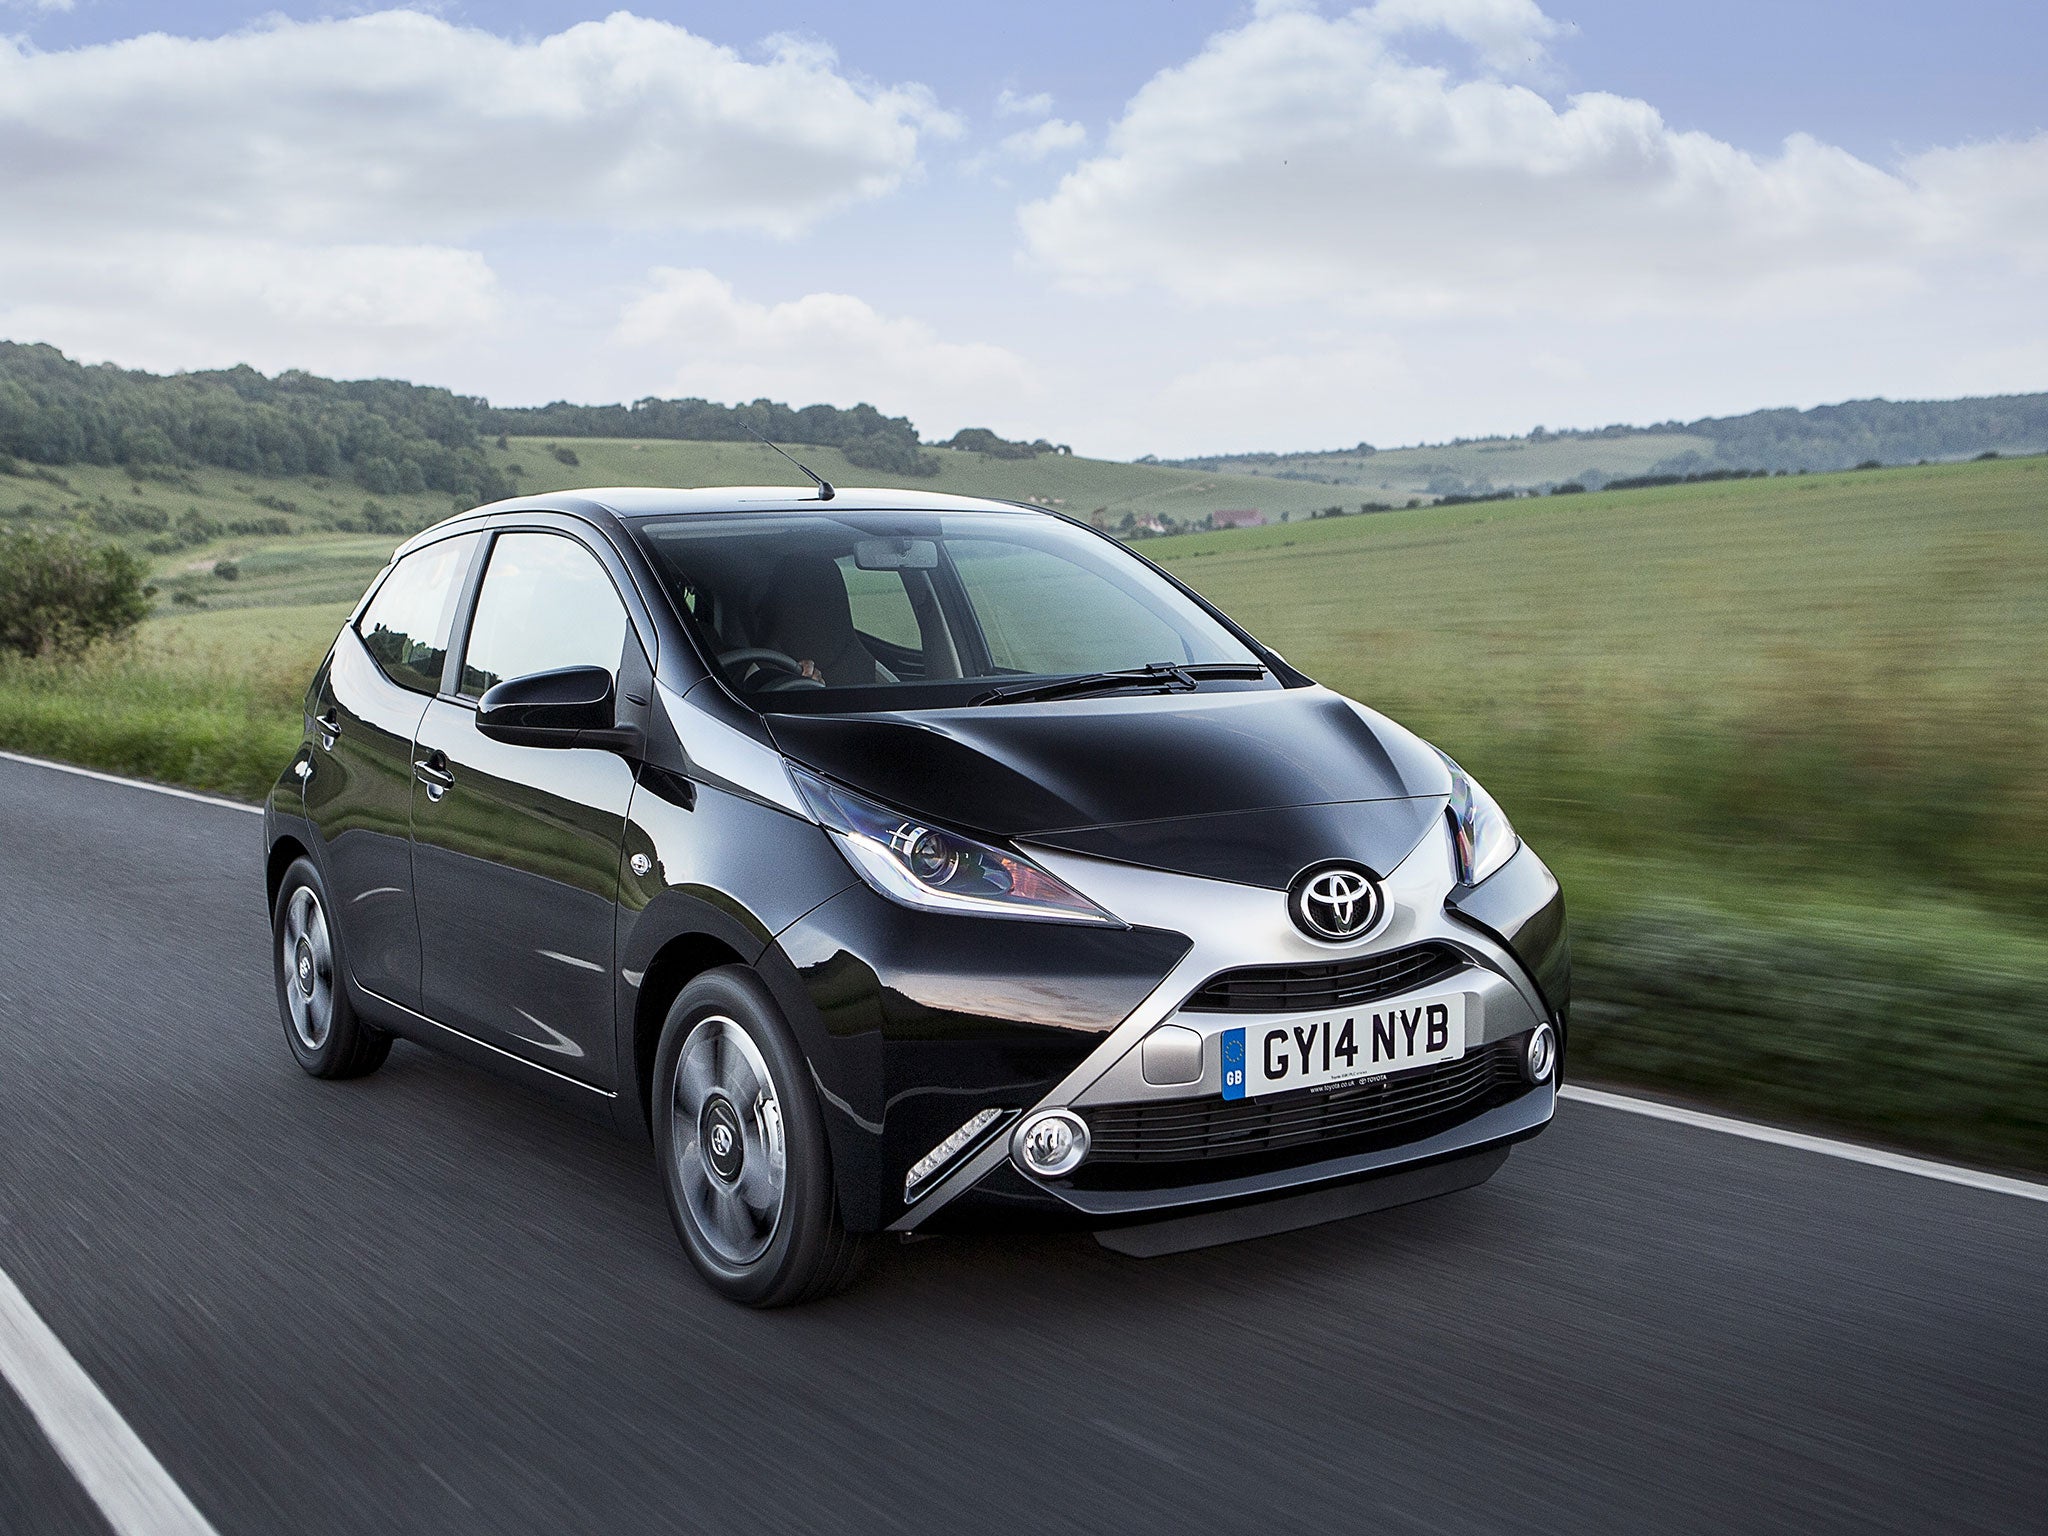 The Aygo is perfectly functional, but the interior feels cheap